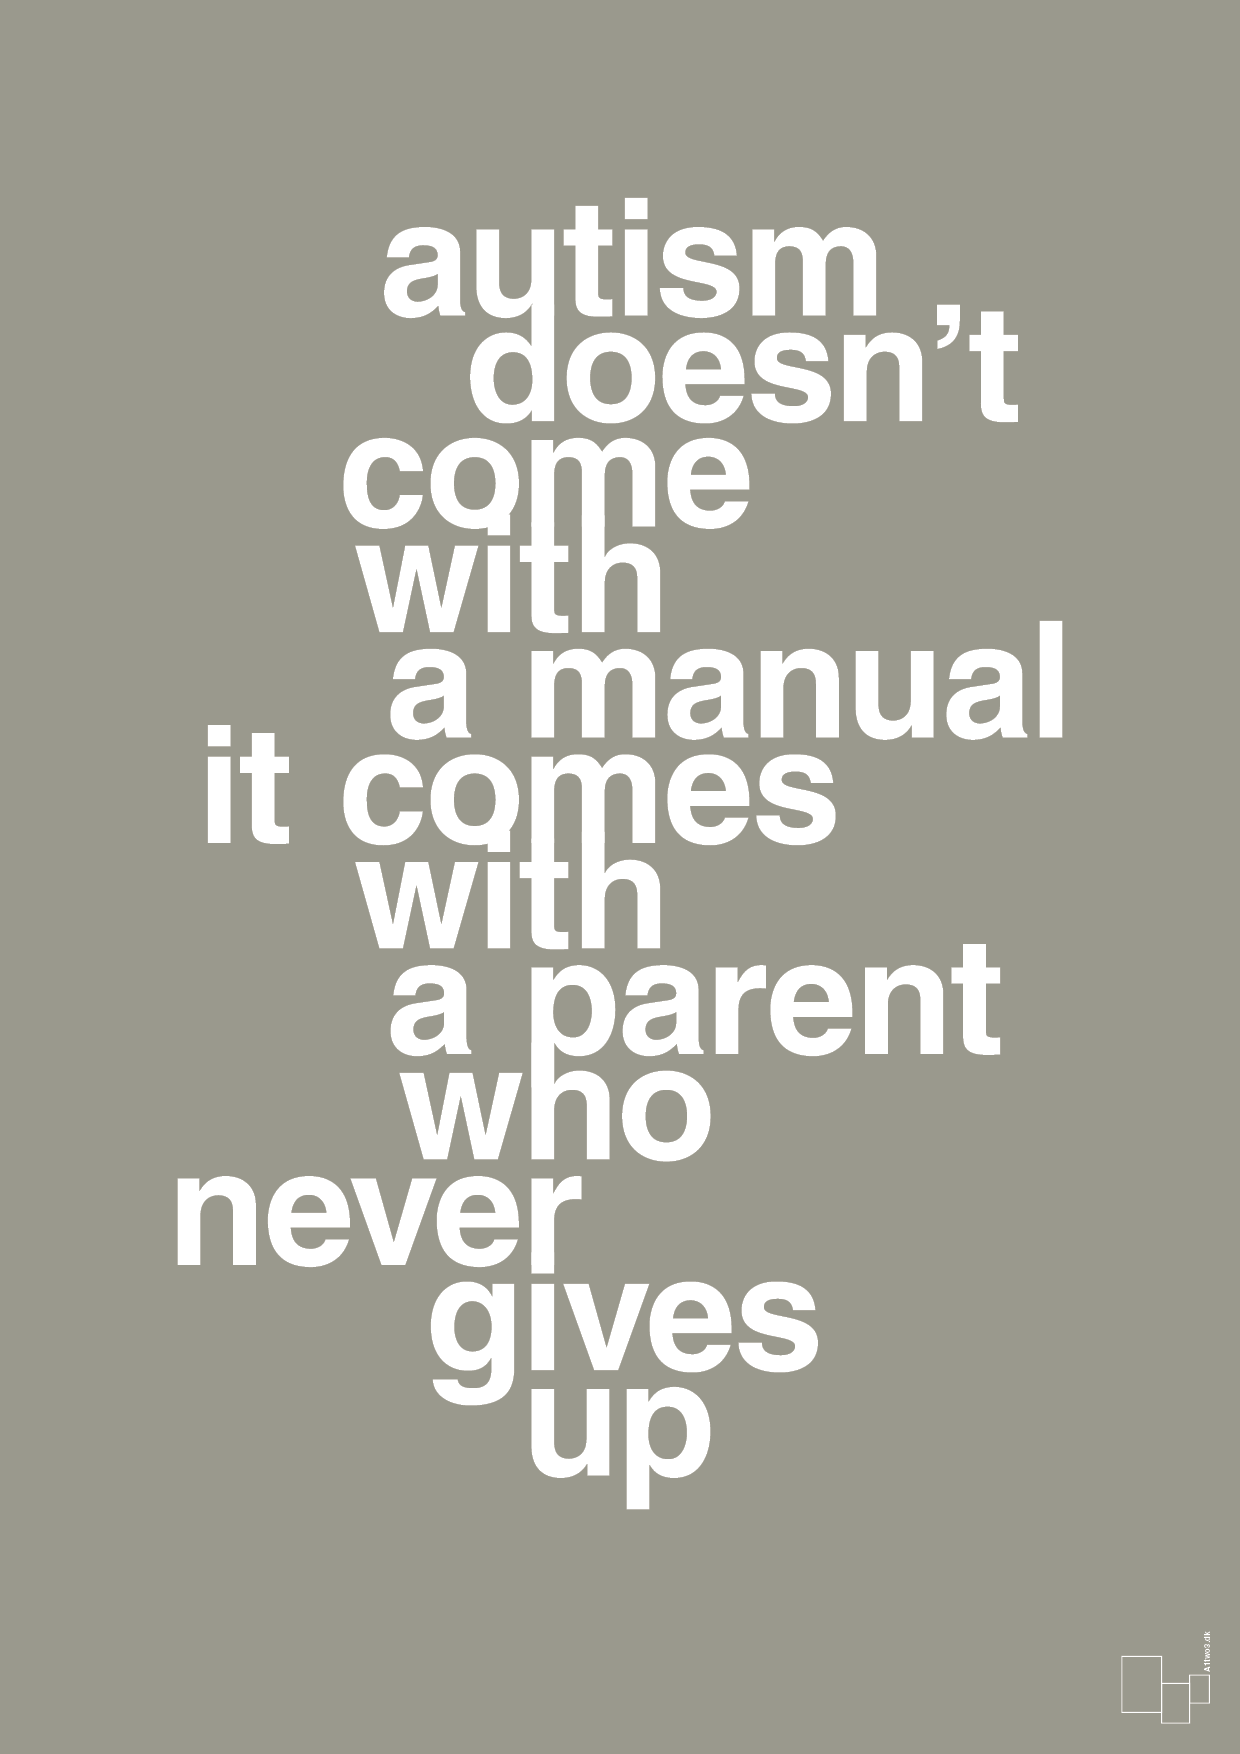 autism doesnt come with a manual it comes with a parent who never gives up - Plakat med Samfund i Battleship Gray